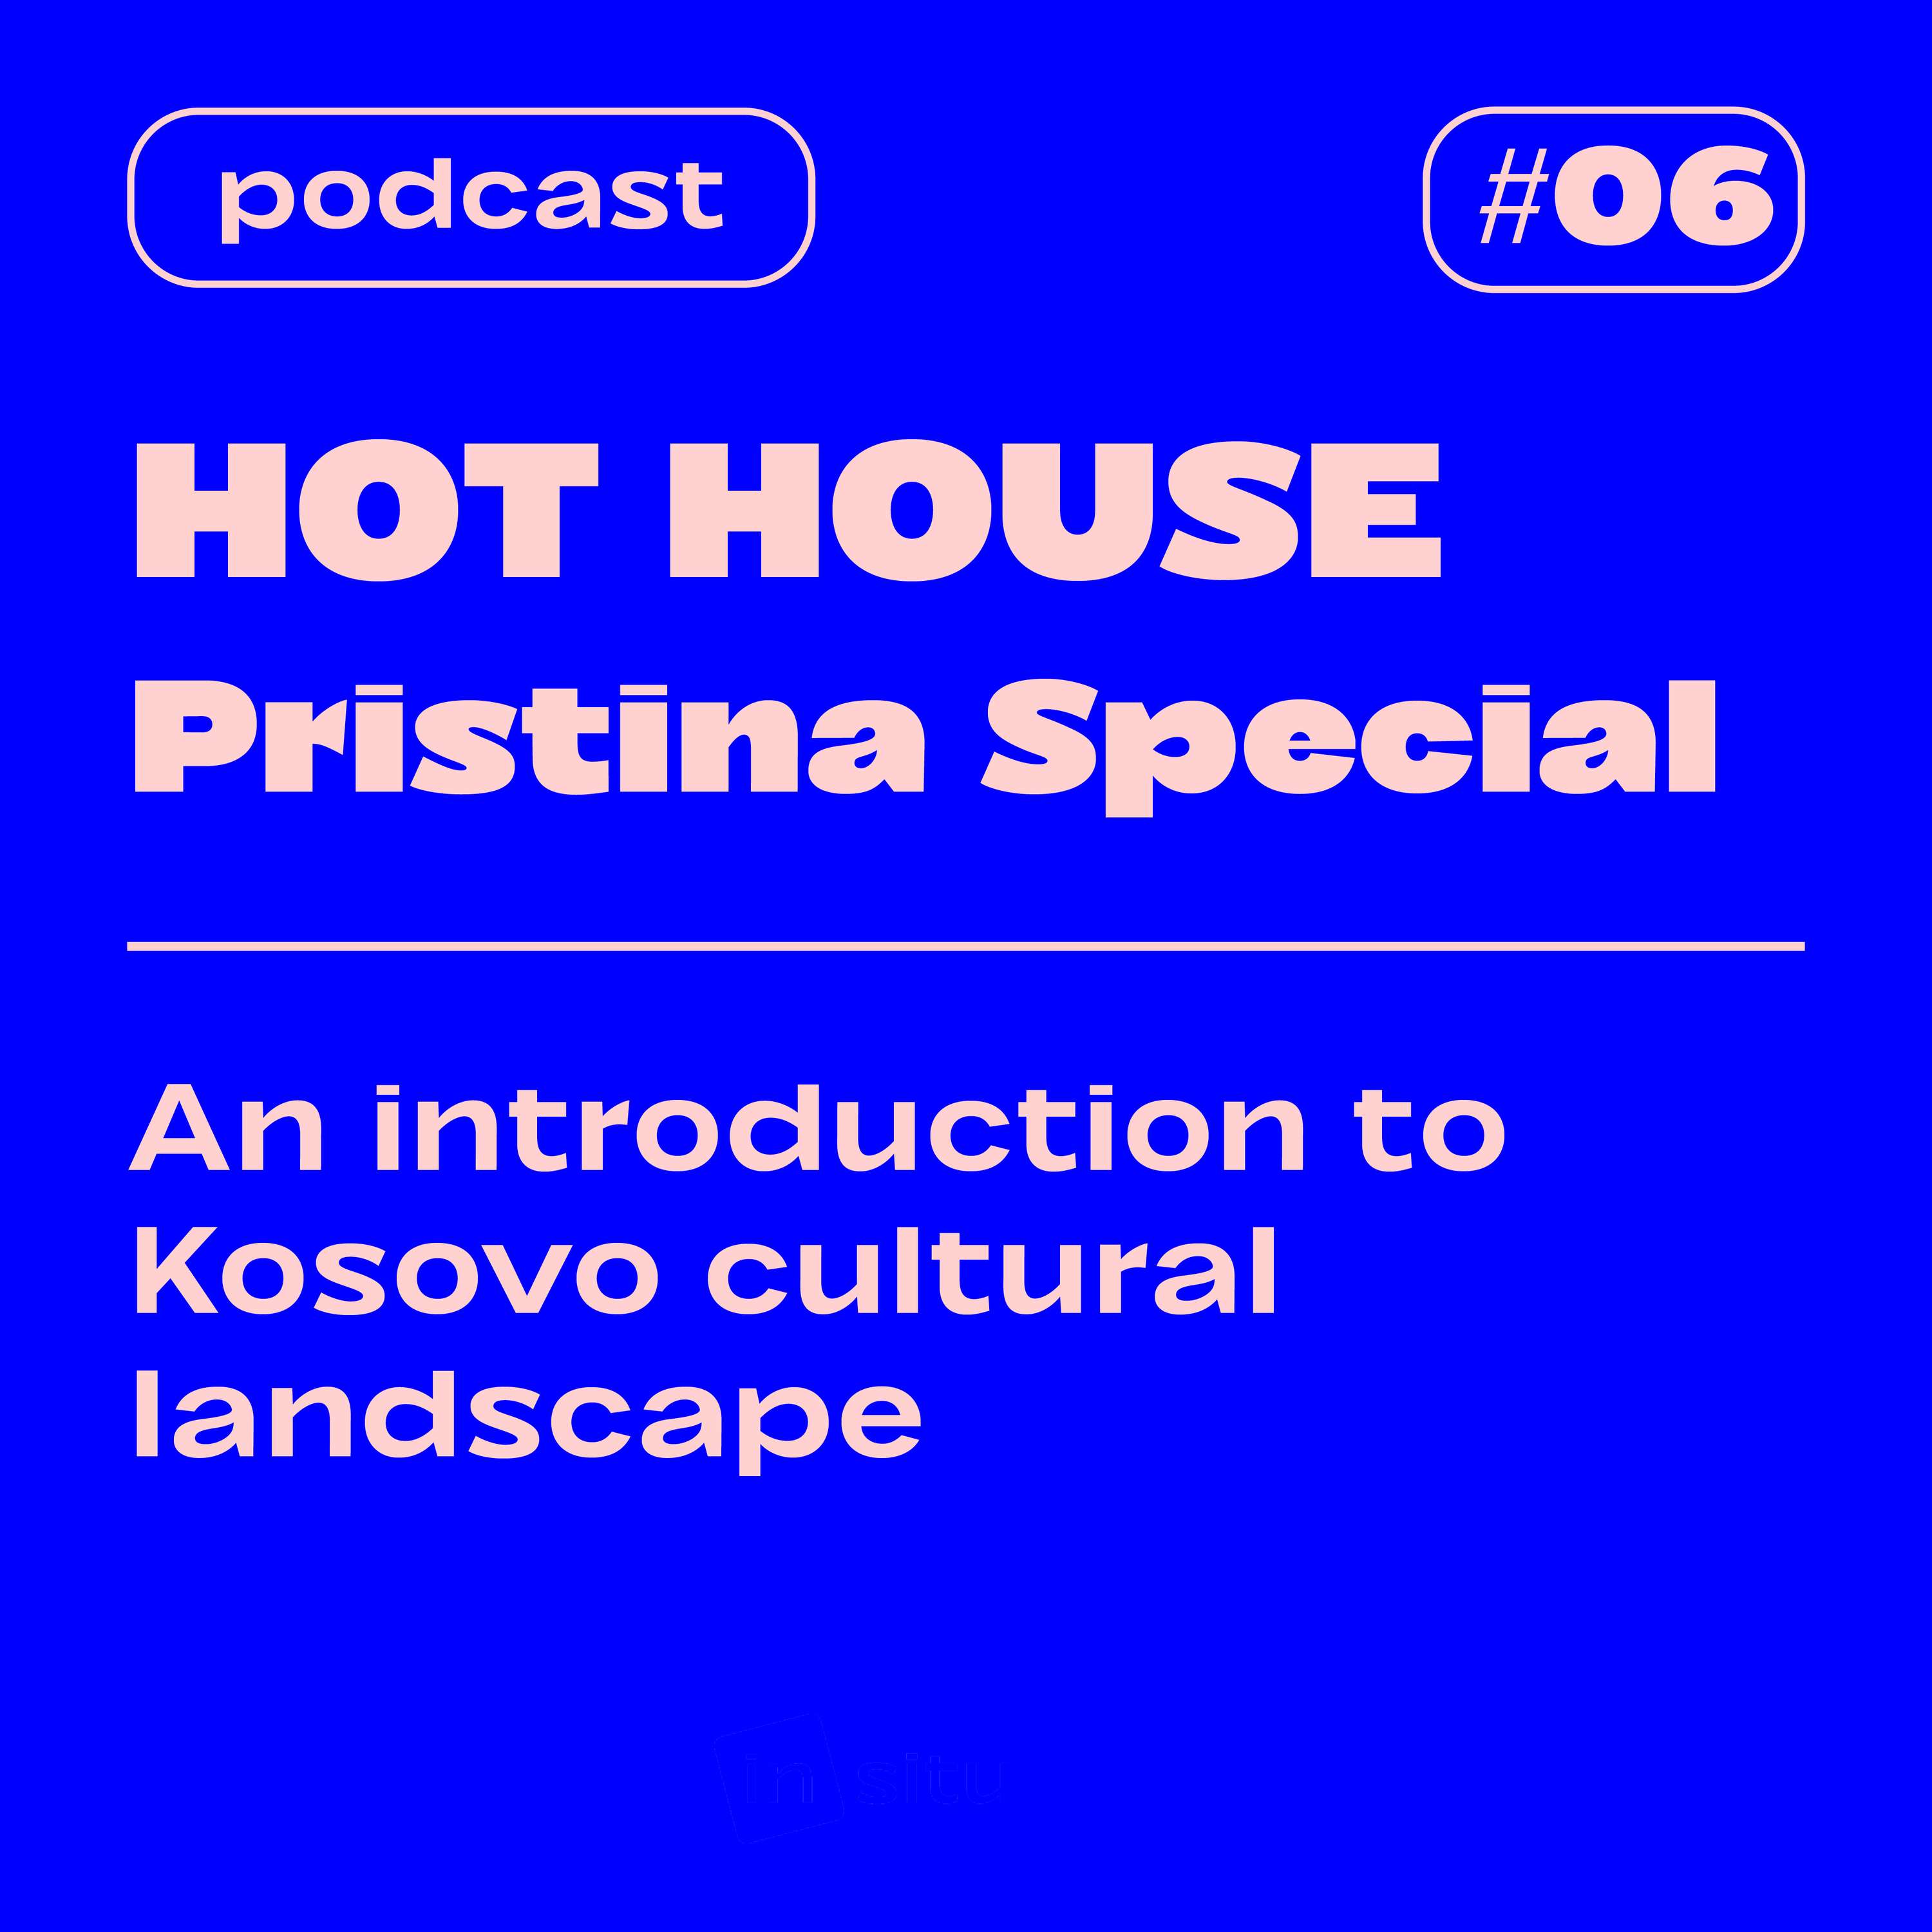 PRISTINA SPECIAL — An introduction to Kosovo cultural landscape